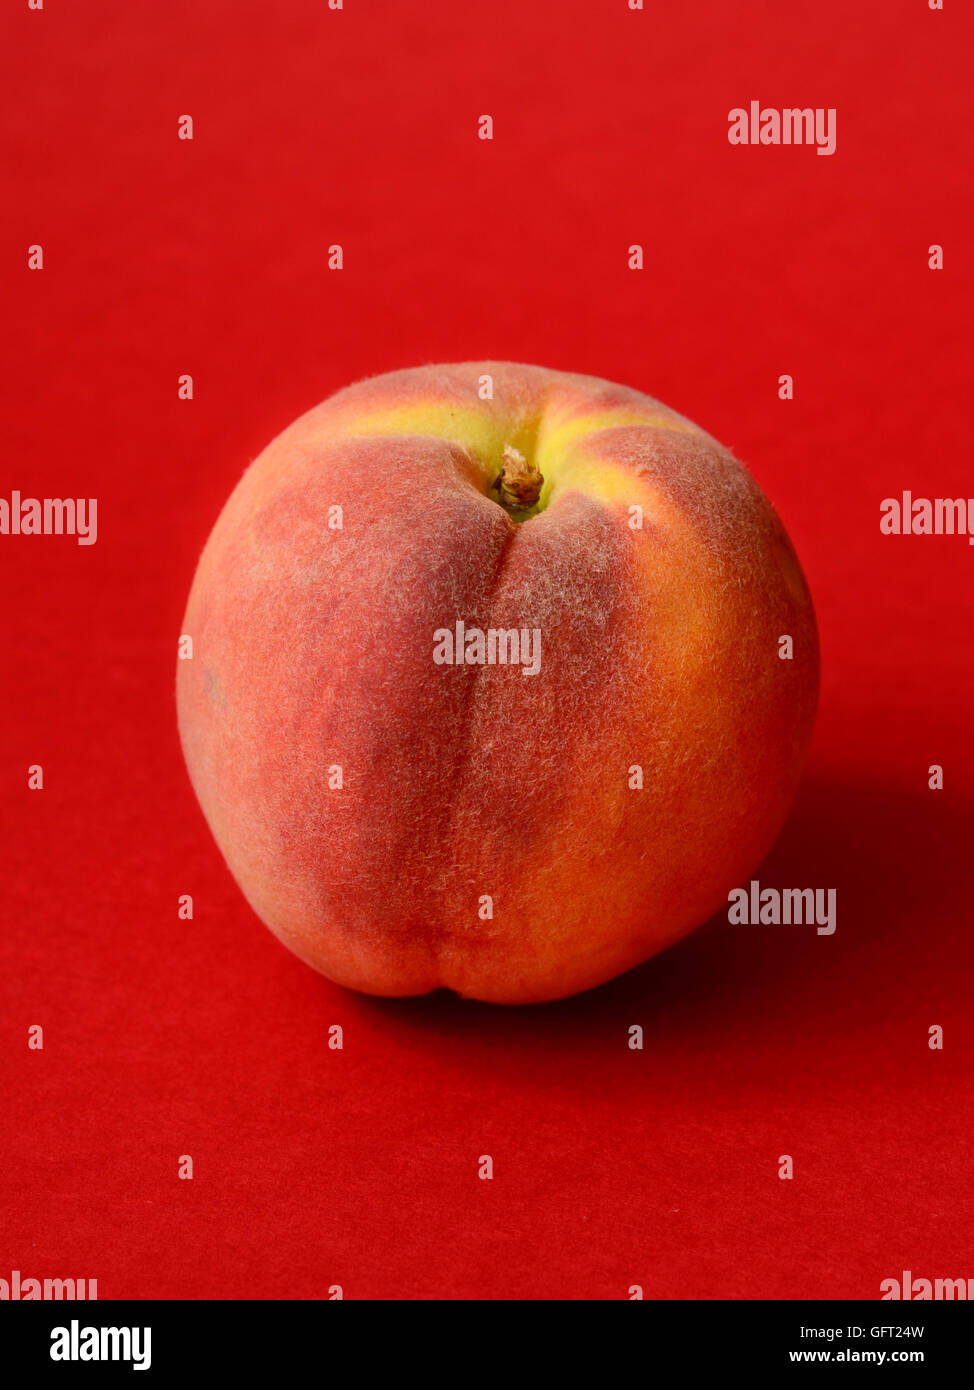 One ripe peach on a red background Stock Photo